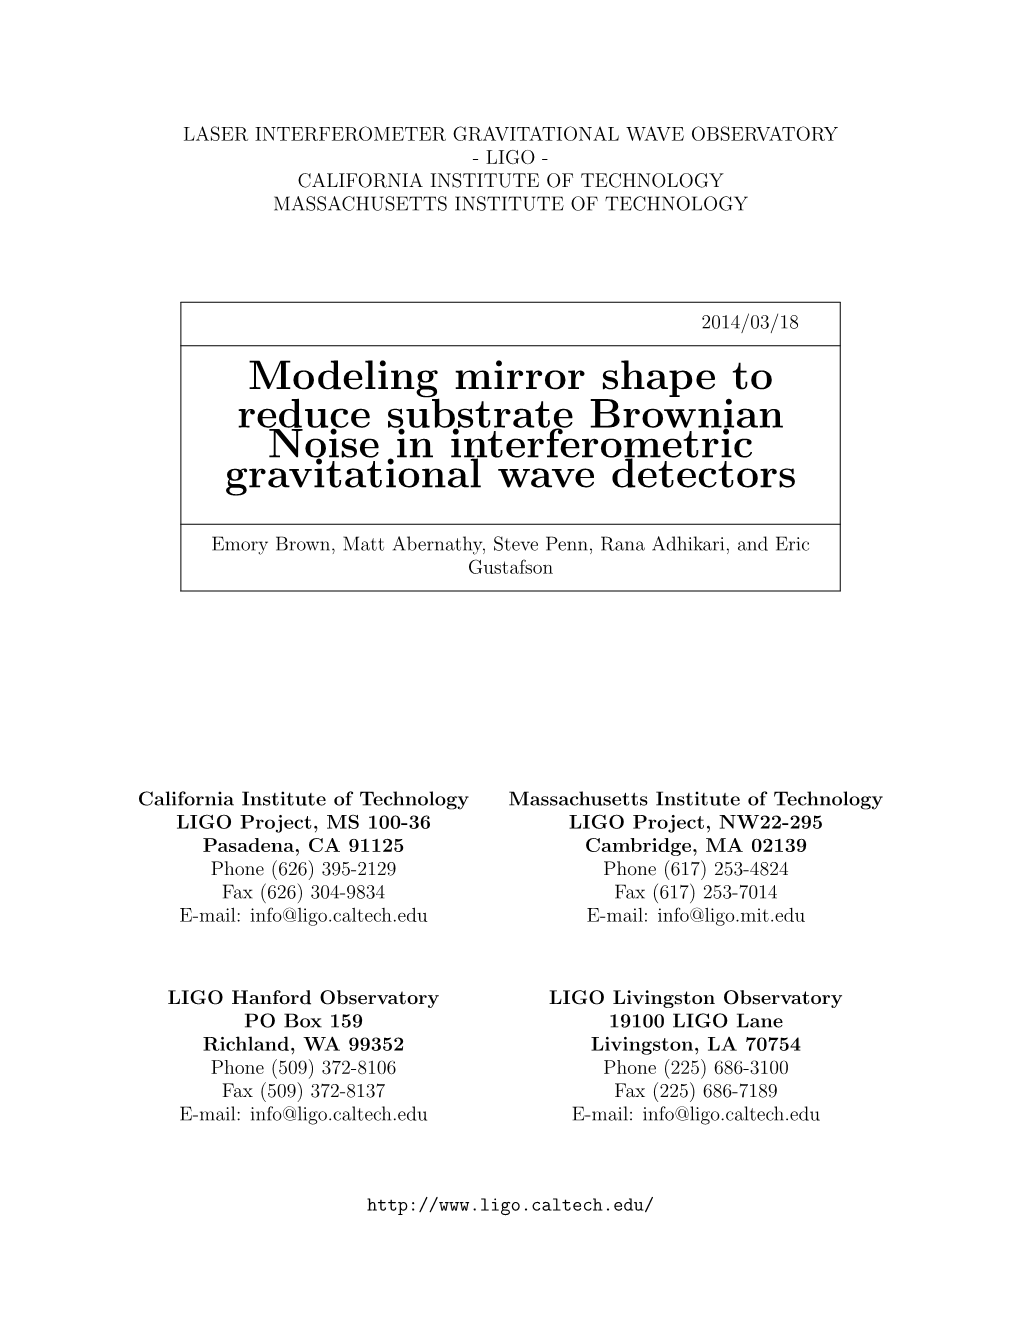 Modeling Mirror Shape to Reduce Substrate Brownian Noise in Interferometric Gravitational Wave Detectors